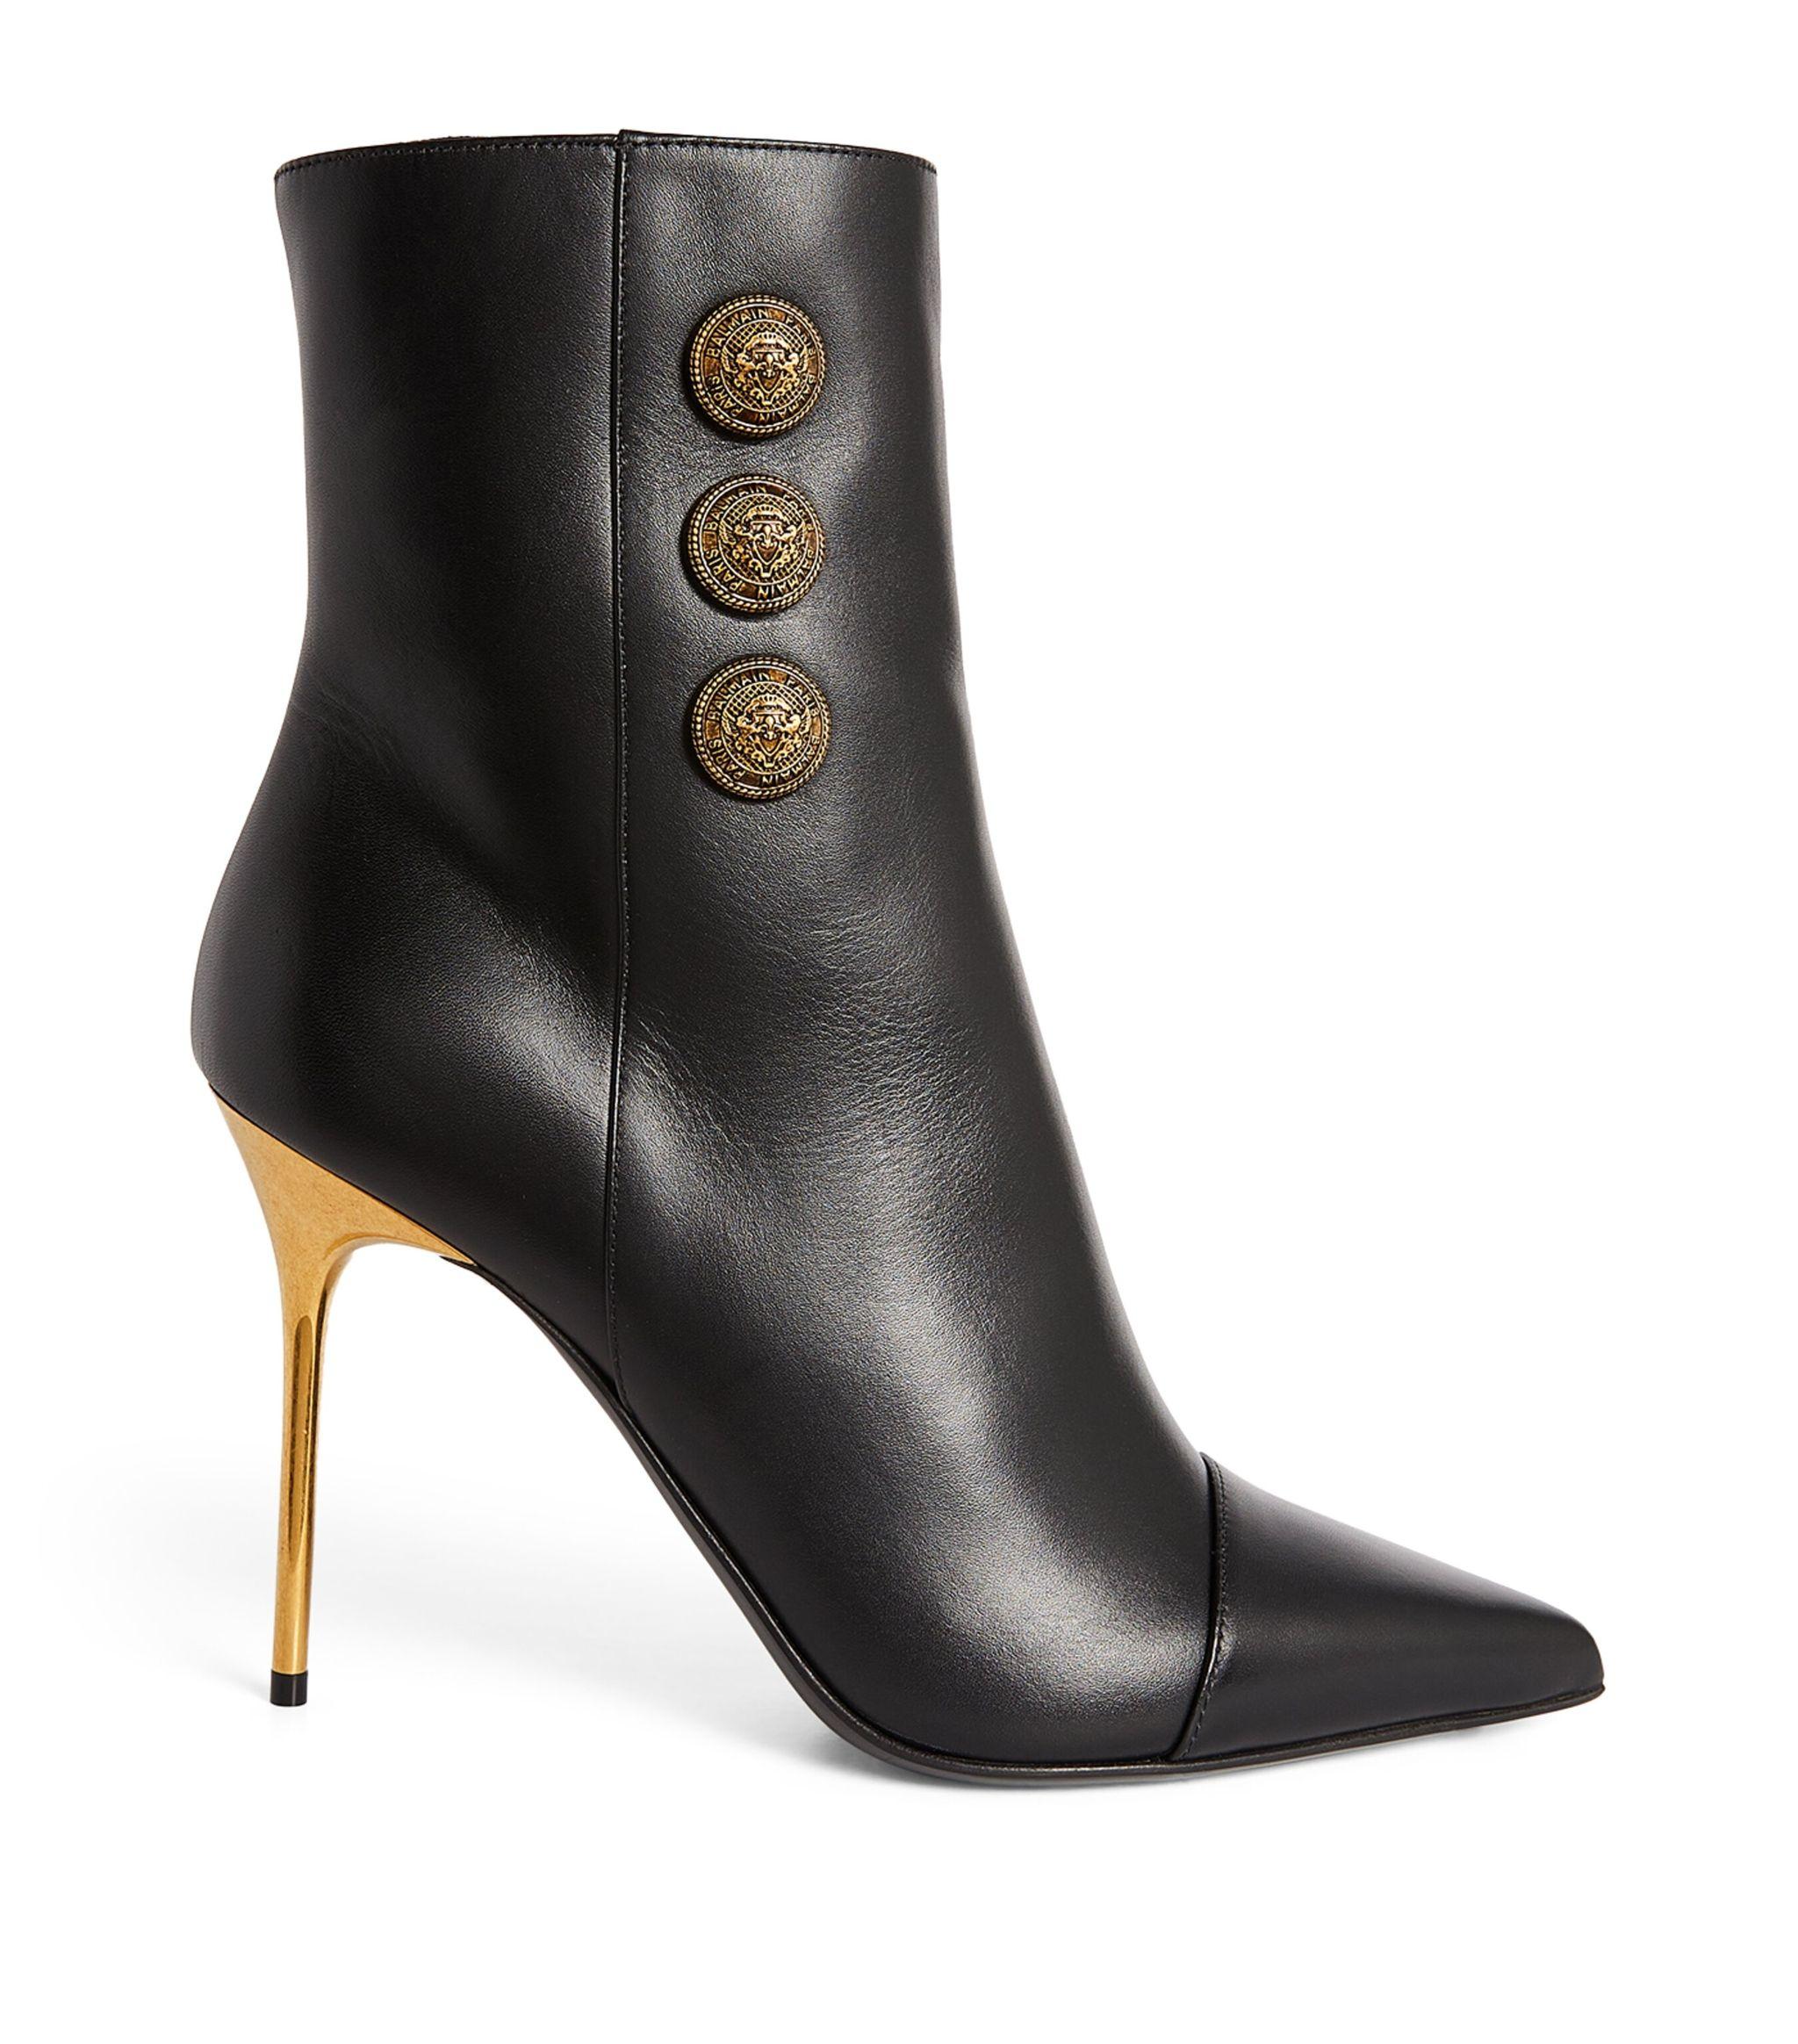 Balmain Leather Roni Ankle Boots 105 in Black | Lyst